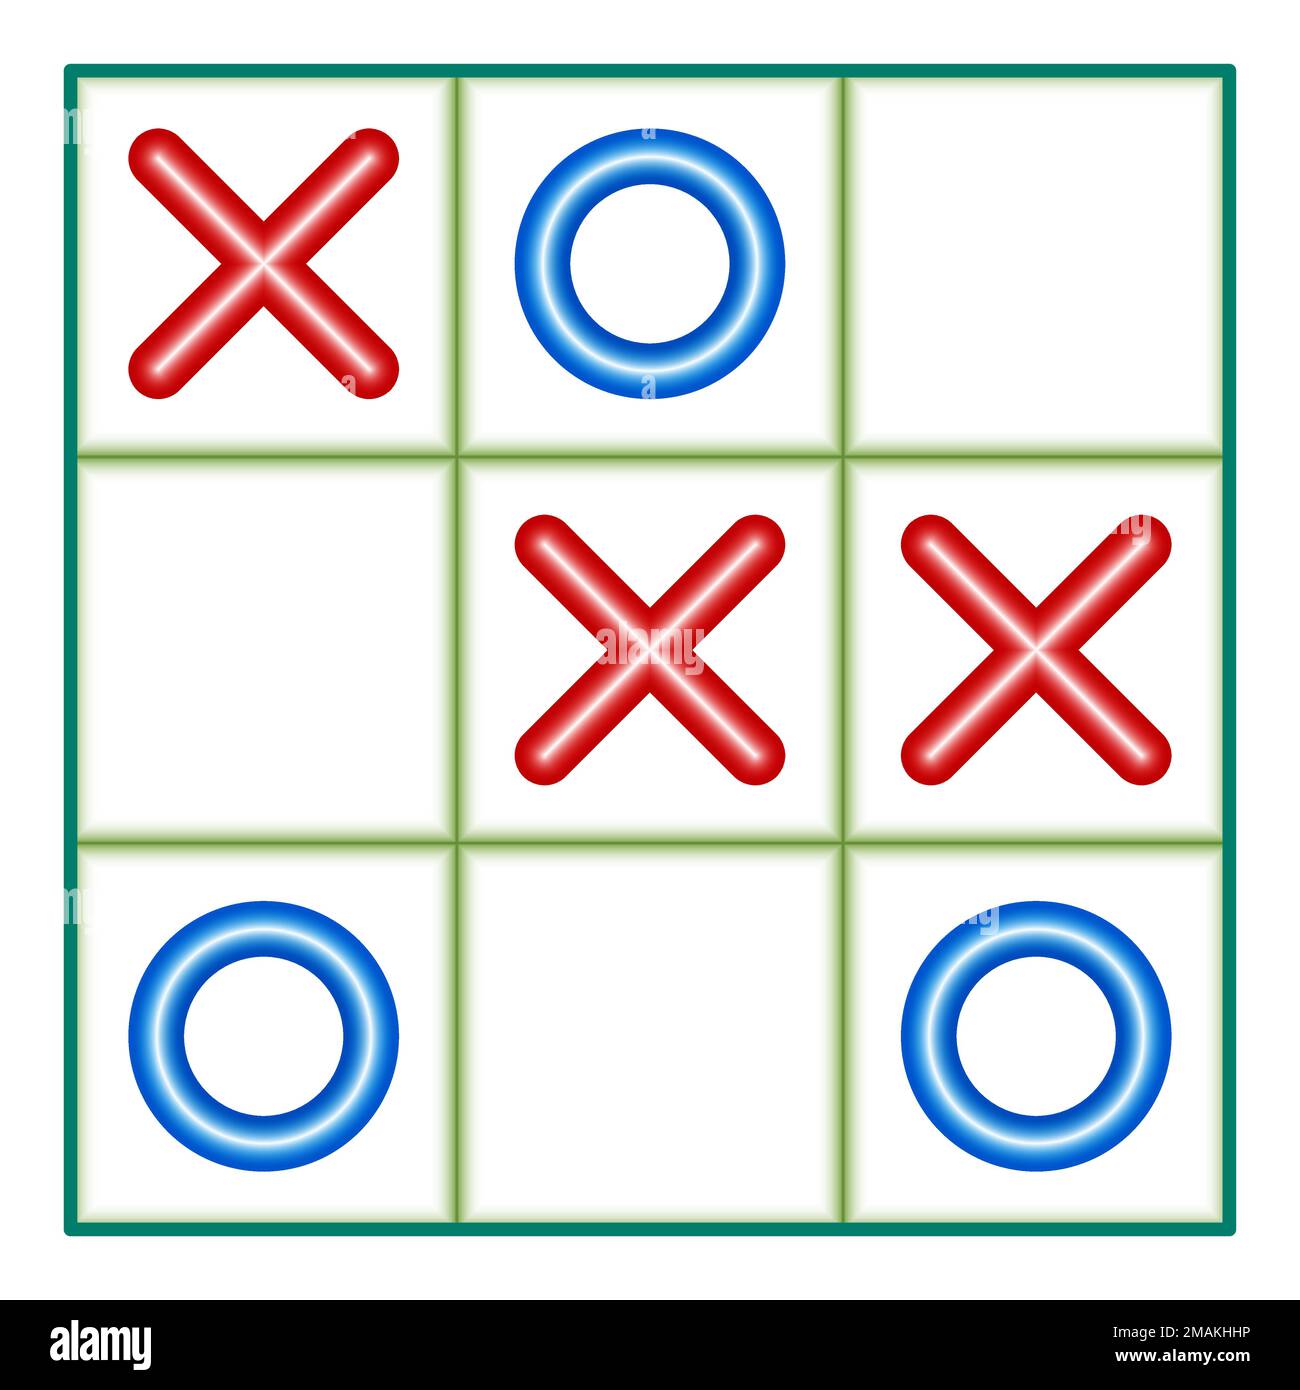 Tic tac toe. Noughts and crosses board game icon isolated. Vector